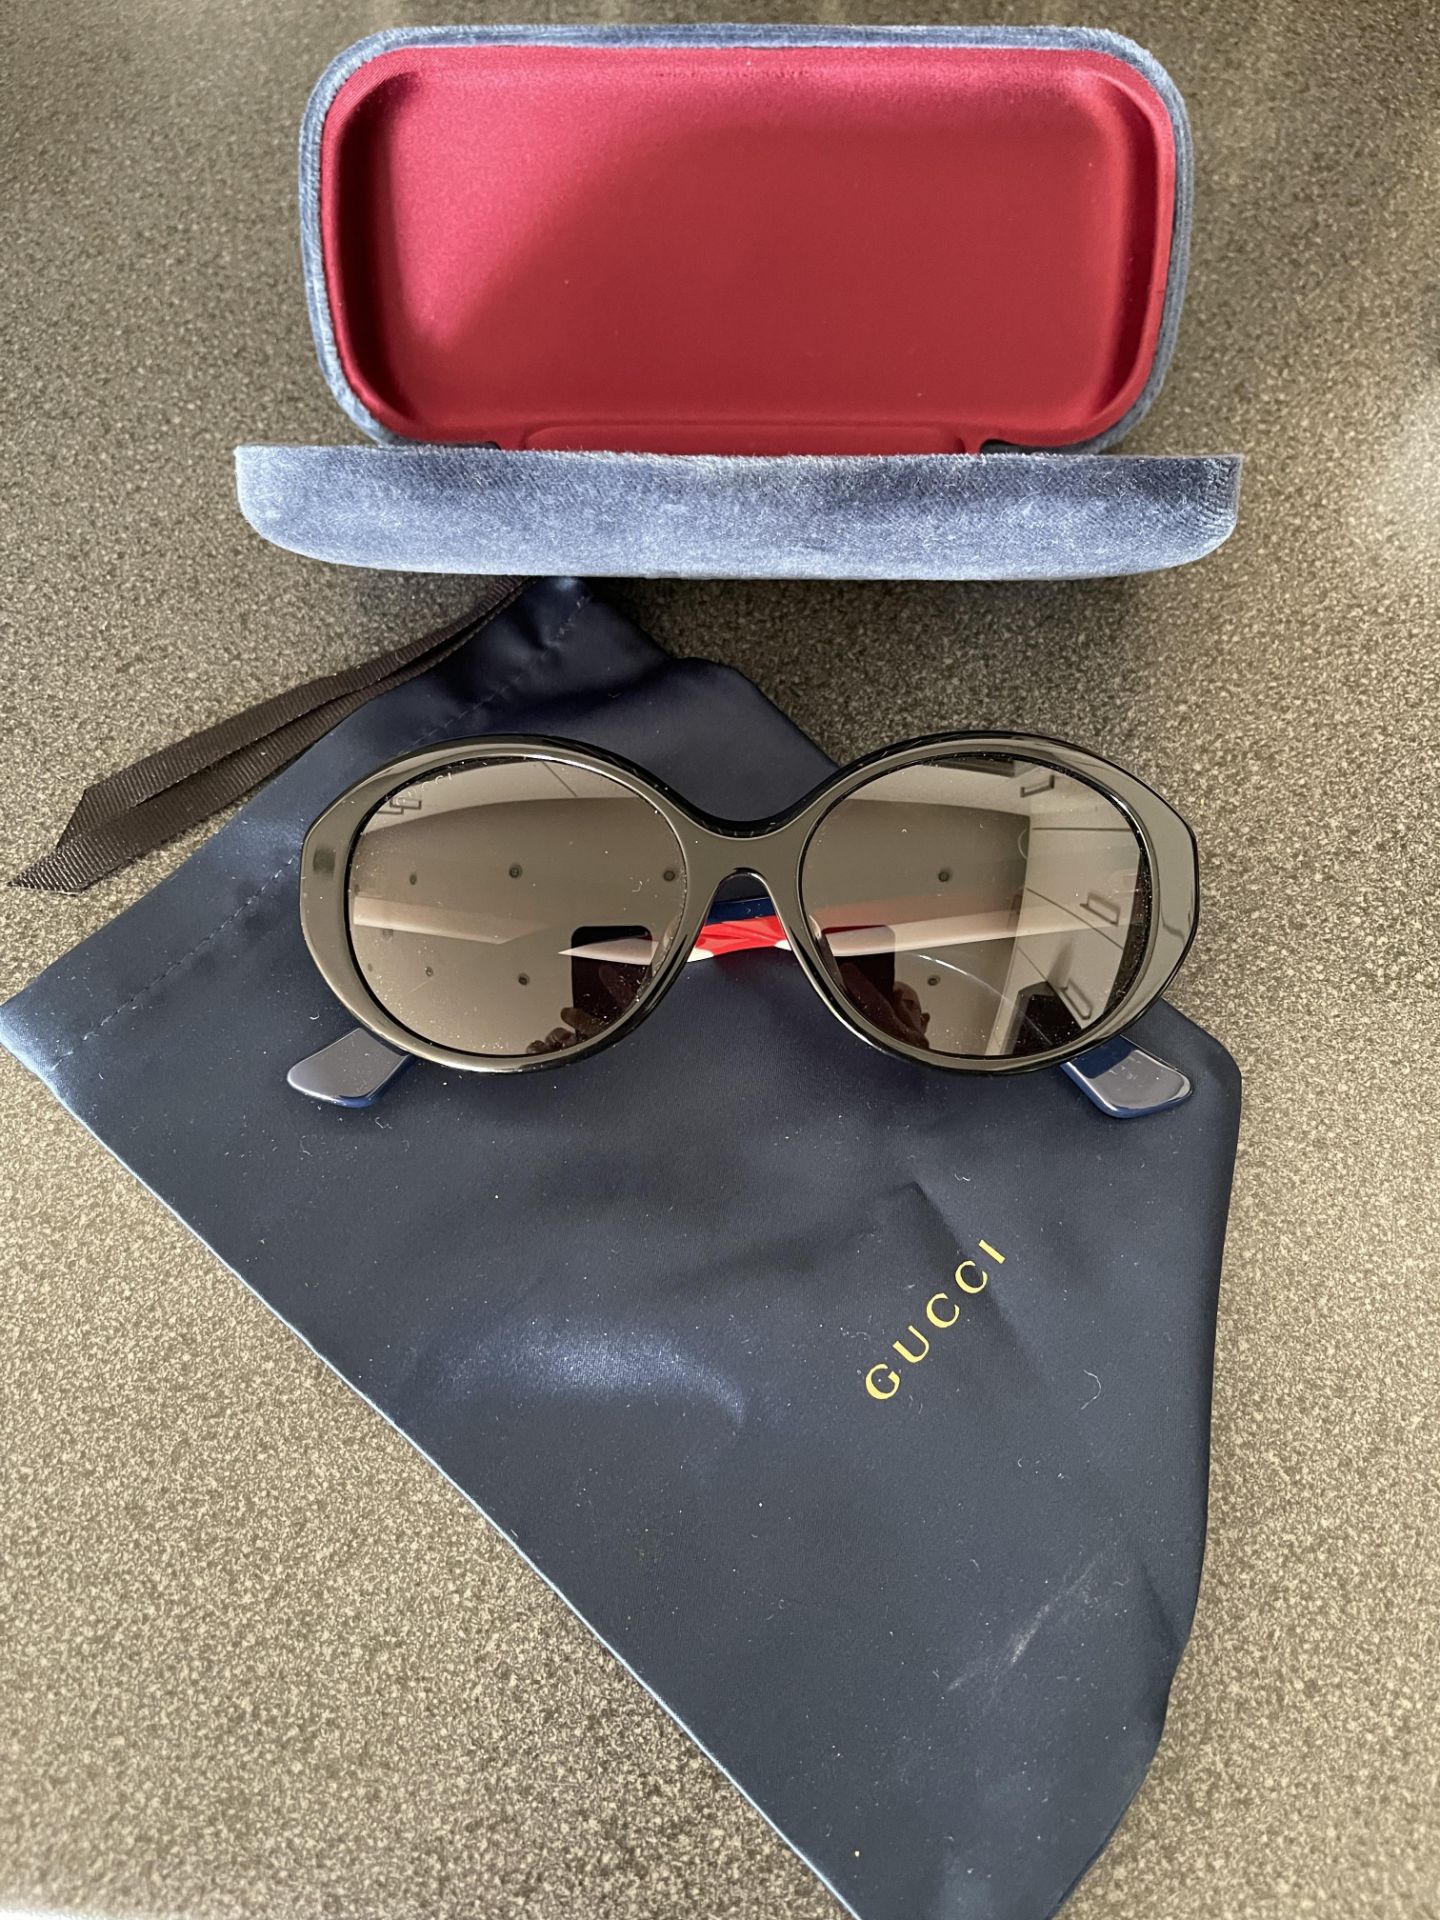 Gucci ladies sunglasses demon from a private jet charter. with case and cloth - Image 2 of 9